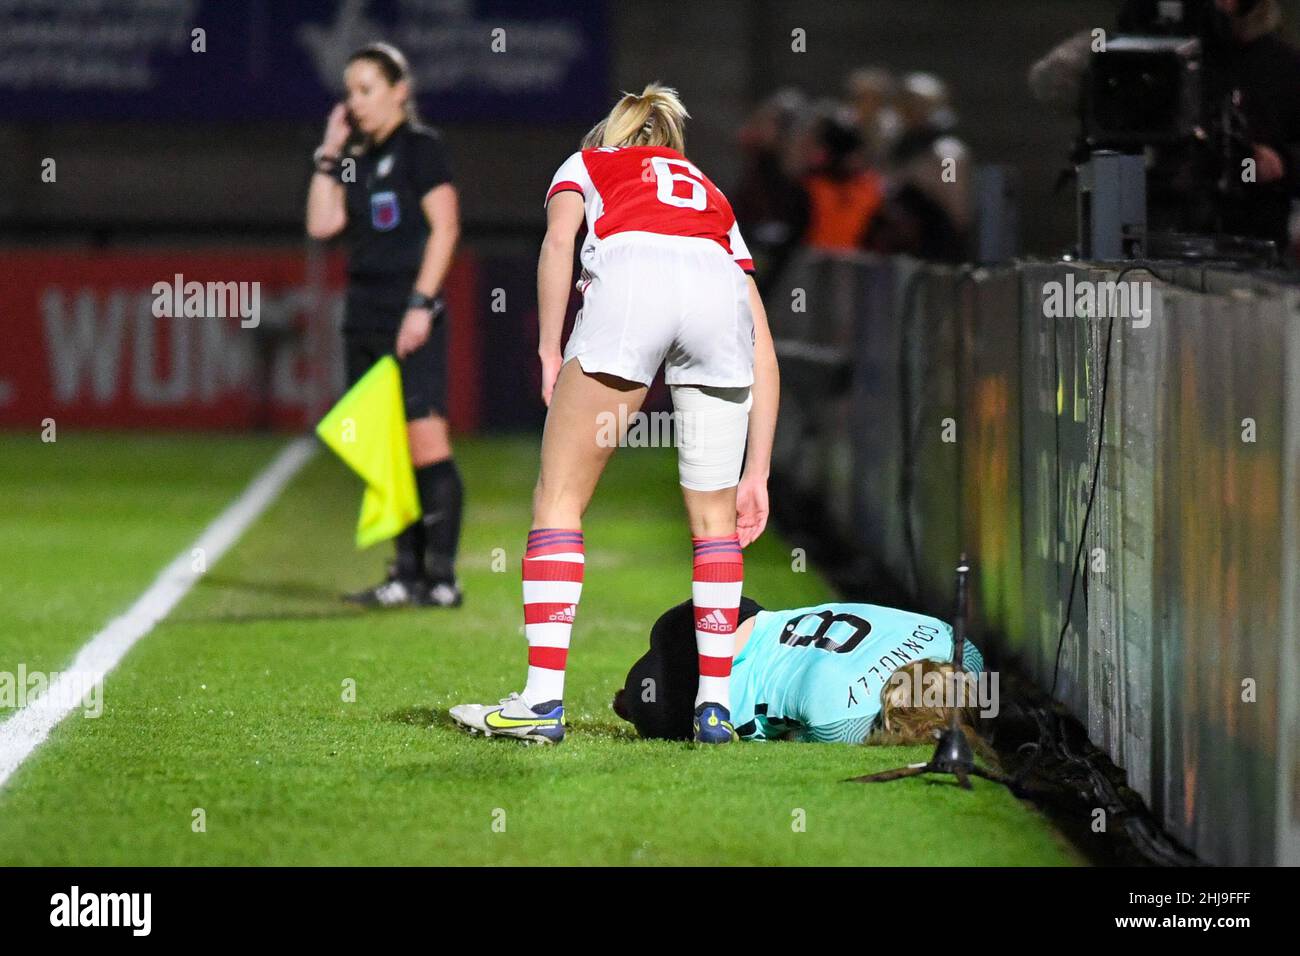 Borehamwood Megan Connolly ( 8 Brighton) injured during the FA Womens Super League game between Arsenal and Brighton and Hove Albion - at Meadow Park Stadium - Borehamwood, England Kevin Hodgson /SPP Credit: SPP Sport Press Photo. /Alamy Live News Stock Photo